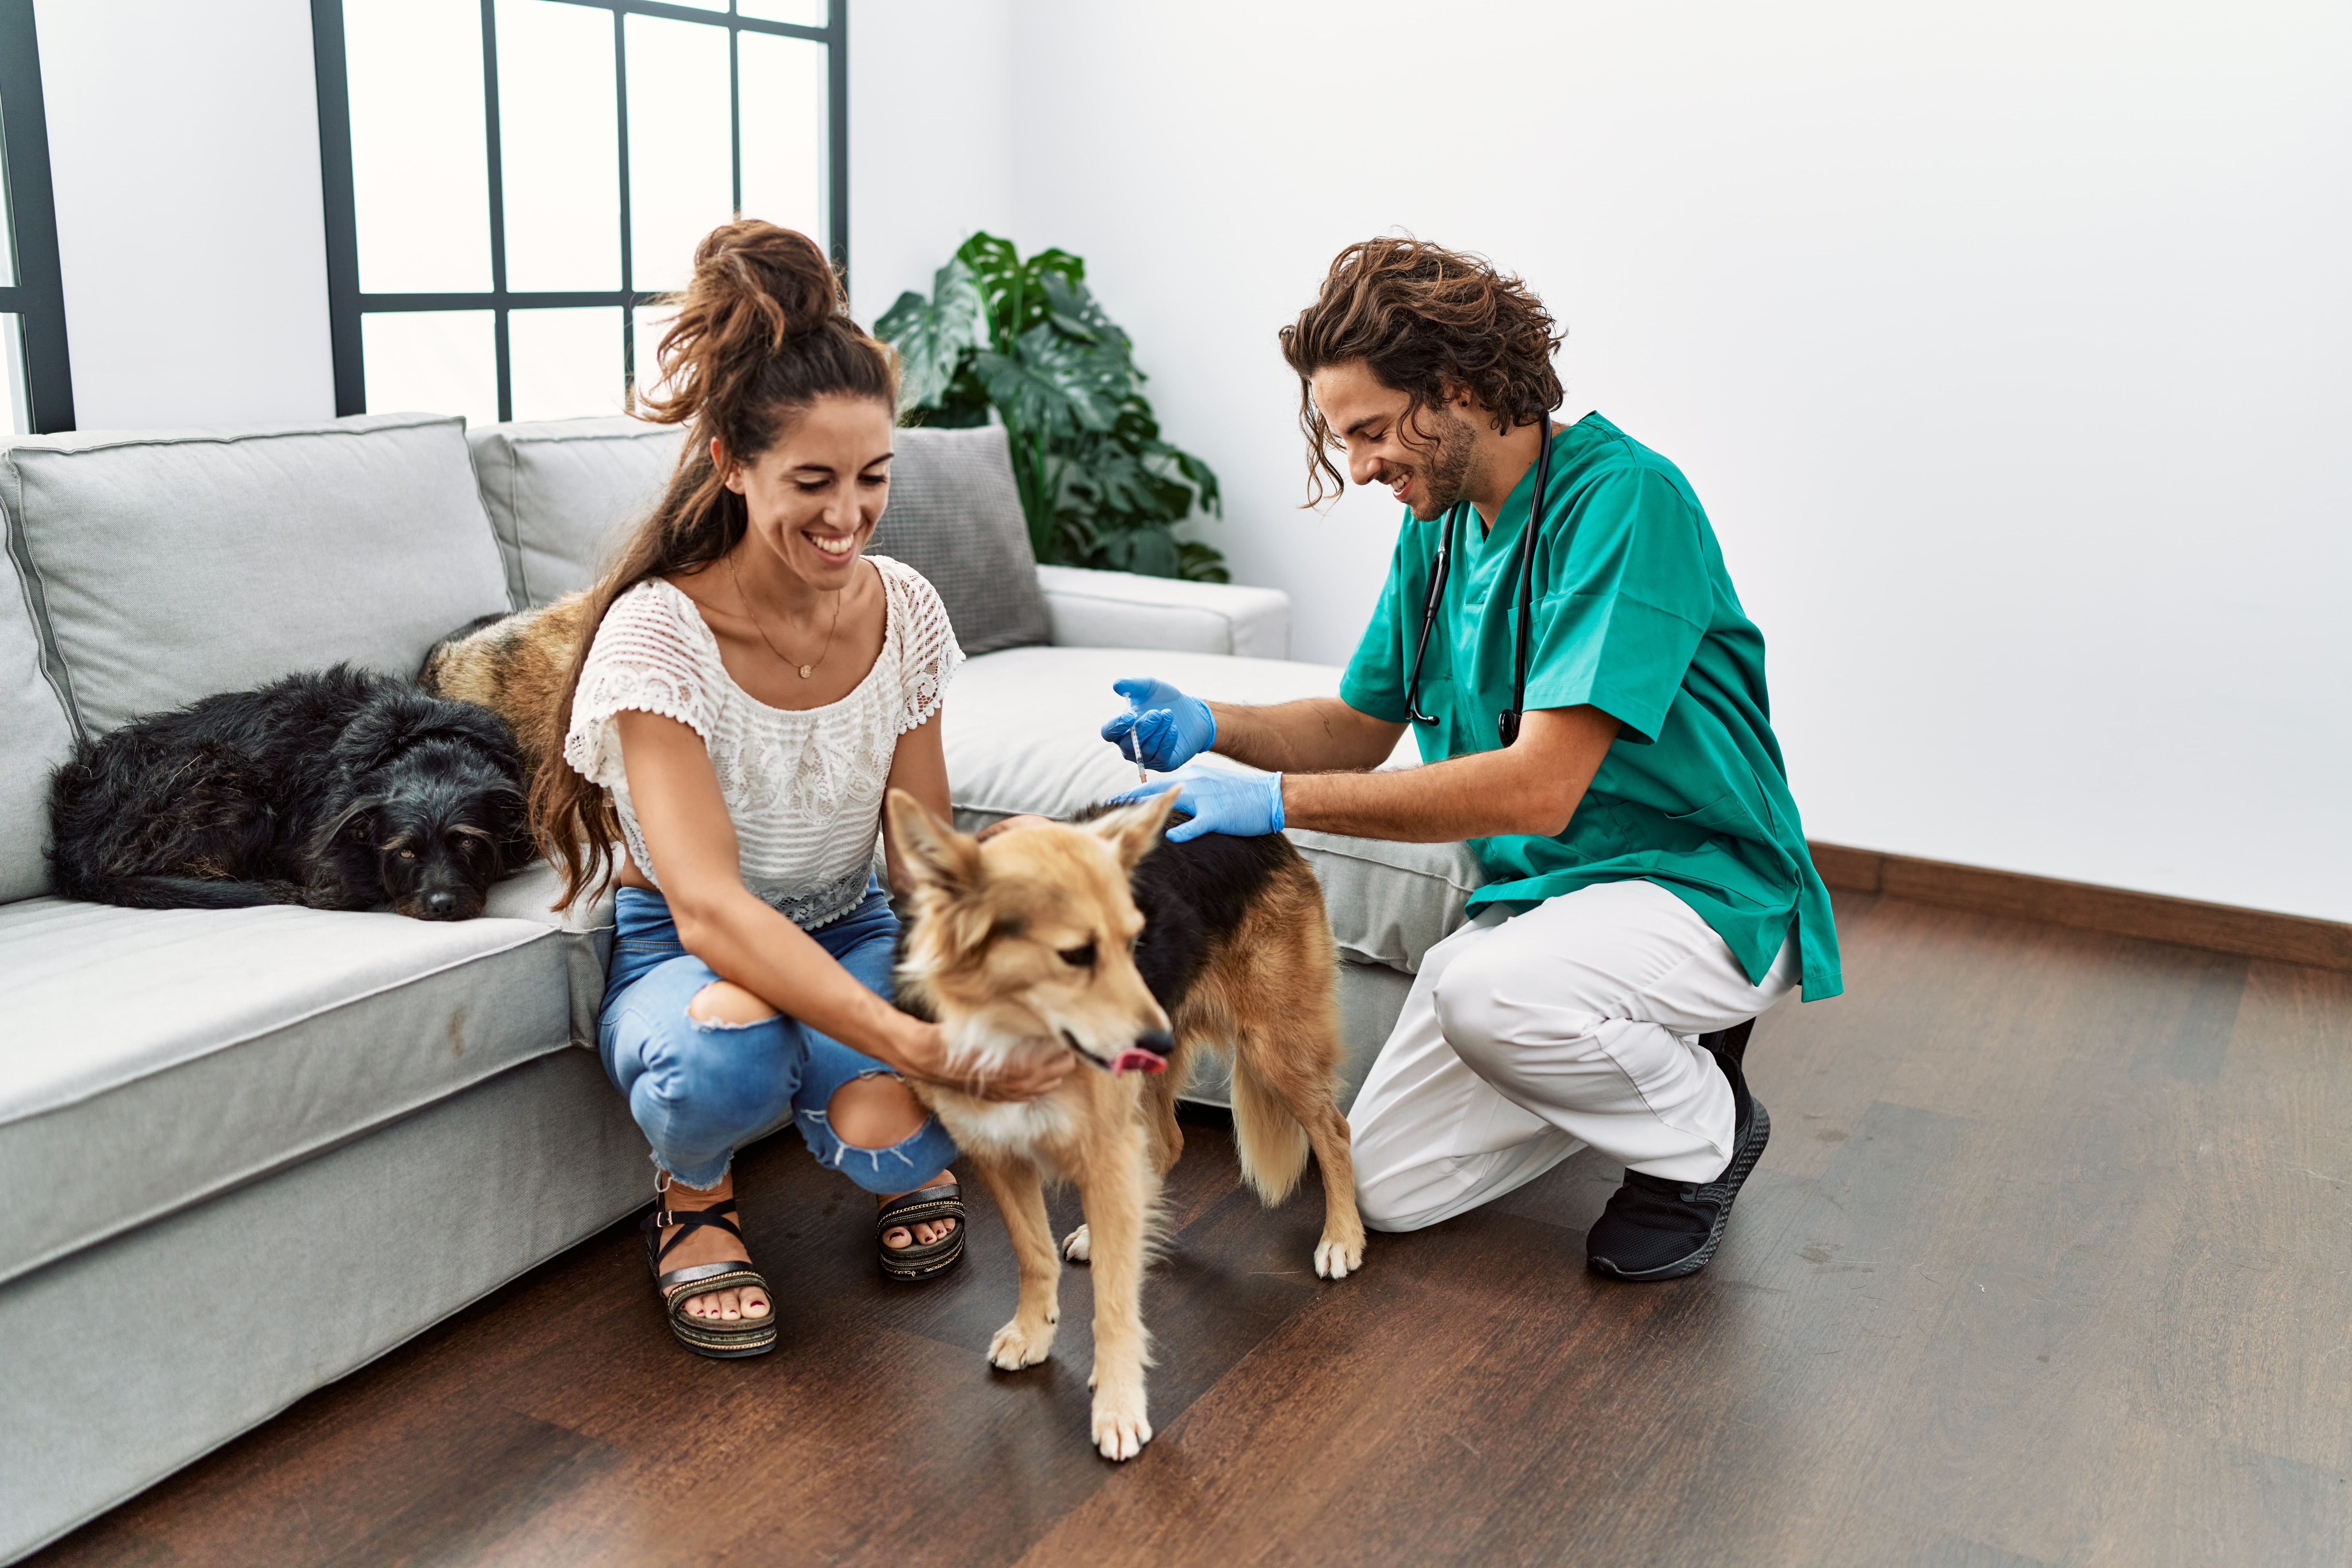 8 marketing tips for house call veterinarians